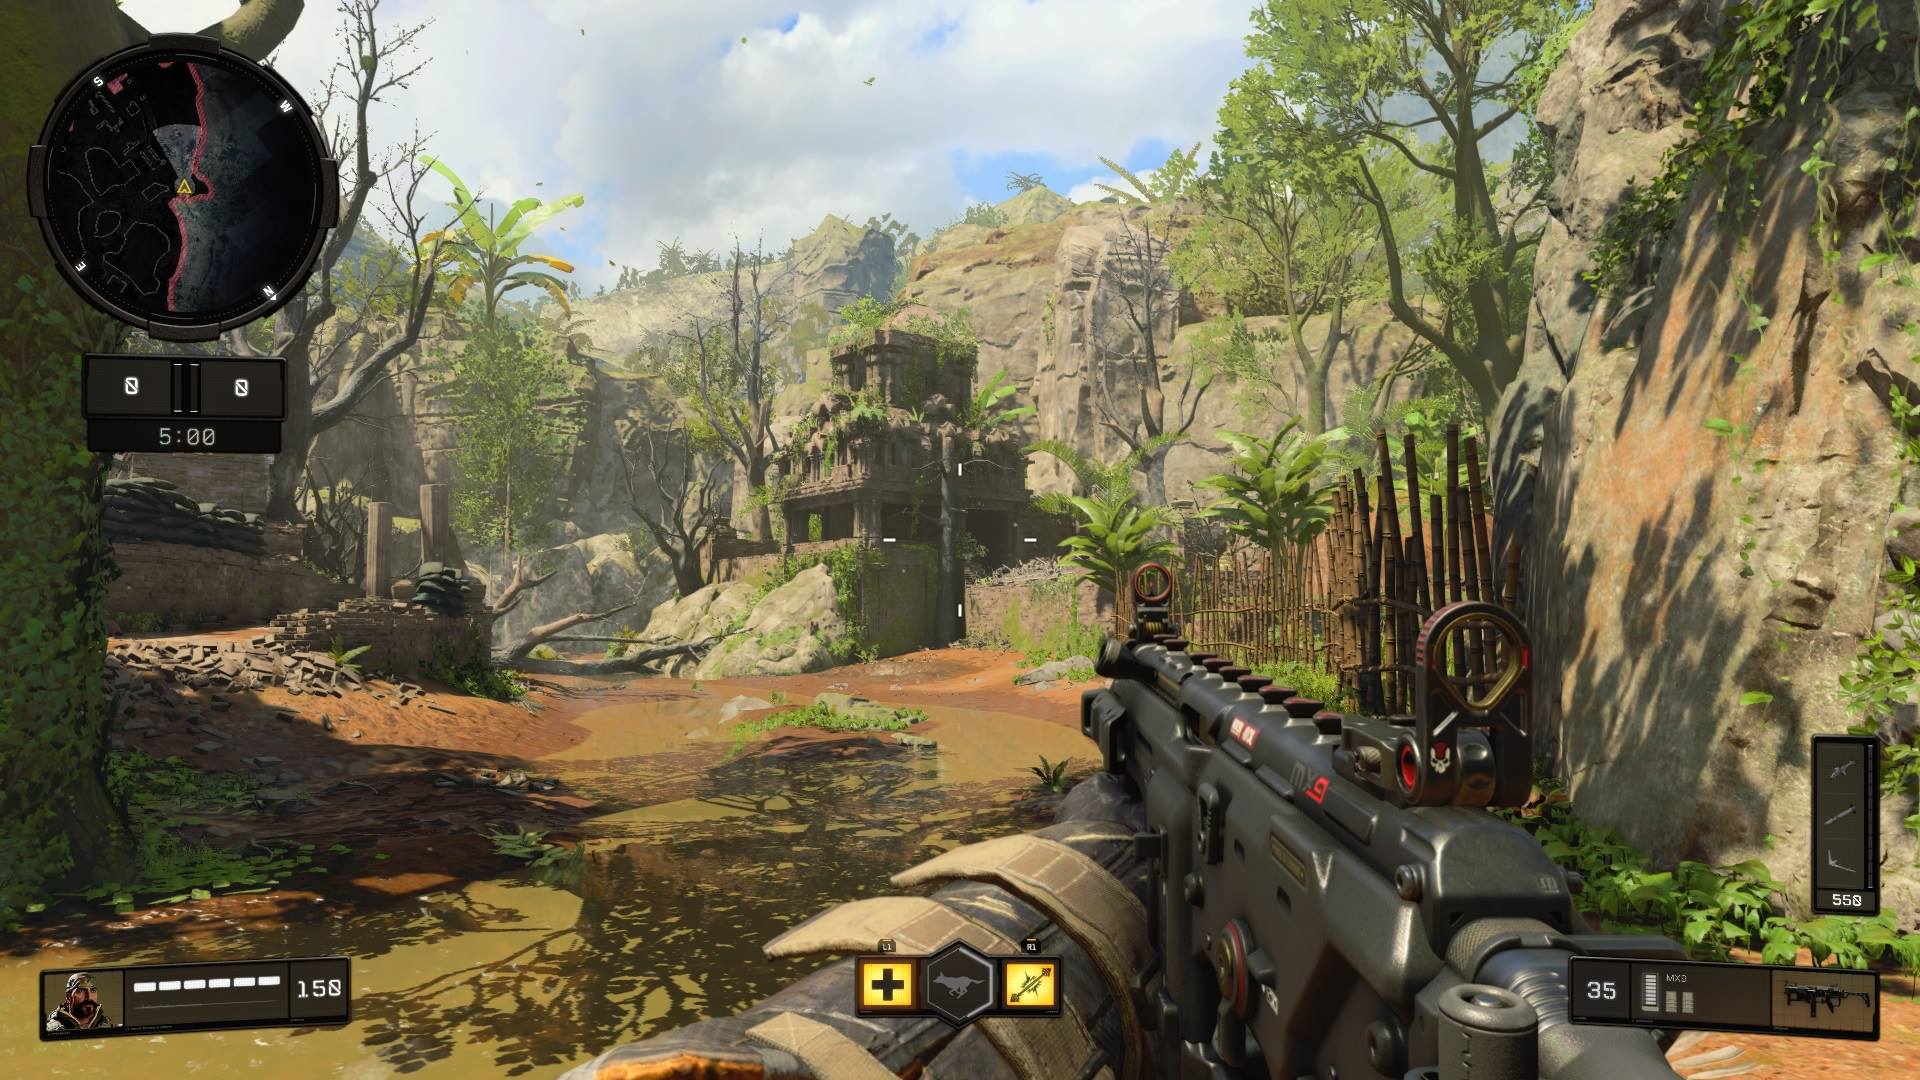 Call of Duty: Black Ops 4: Large areas, connected by vulnerable corridors make "Jungle" thrilling.